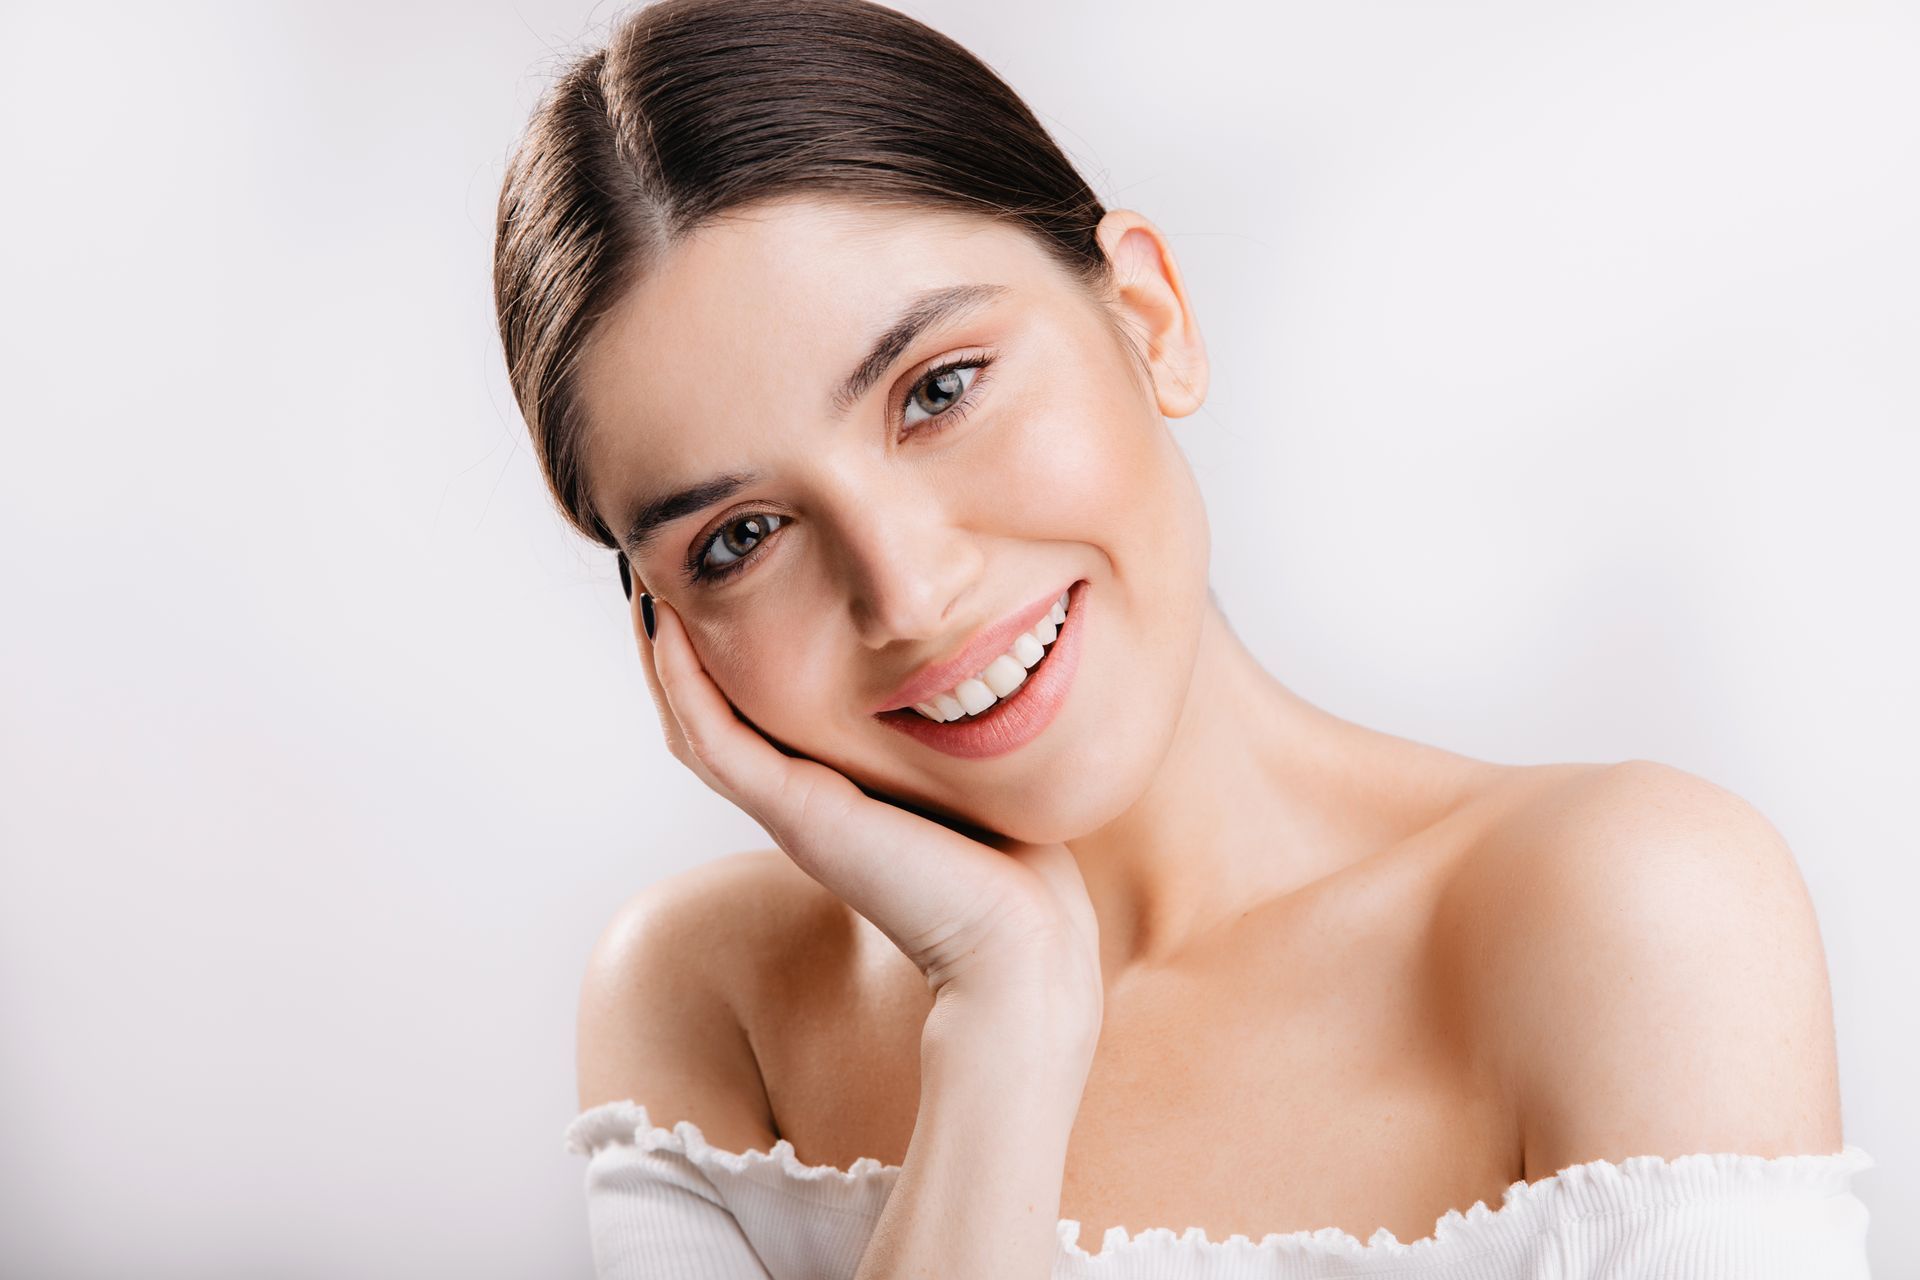 smiling girl with healthy skin